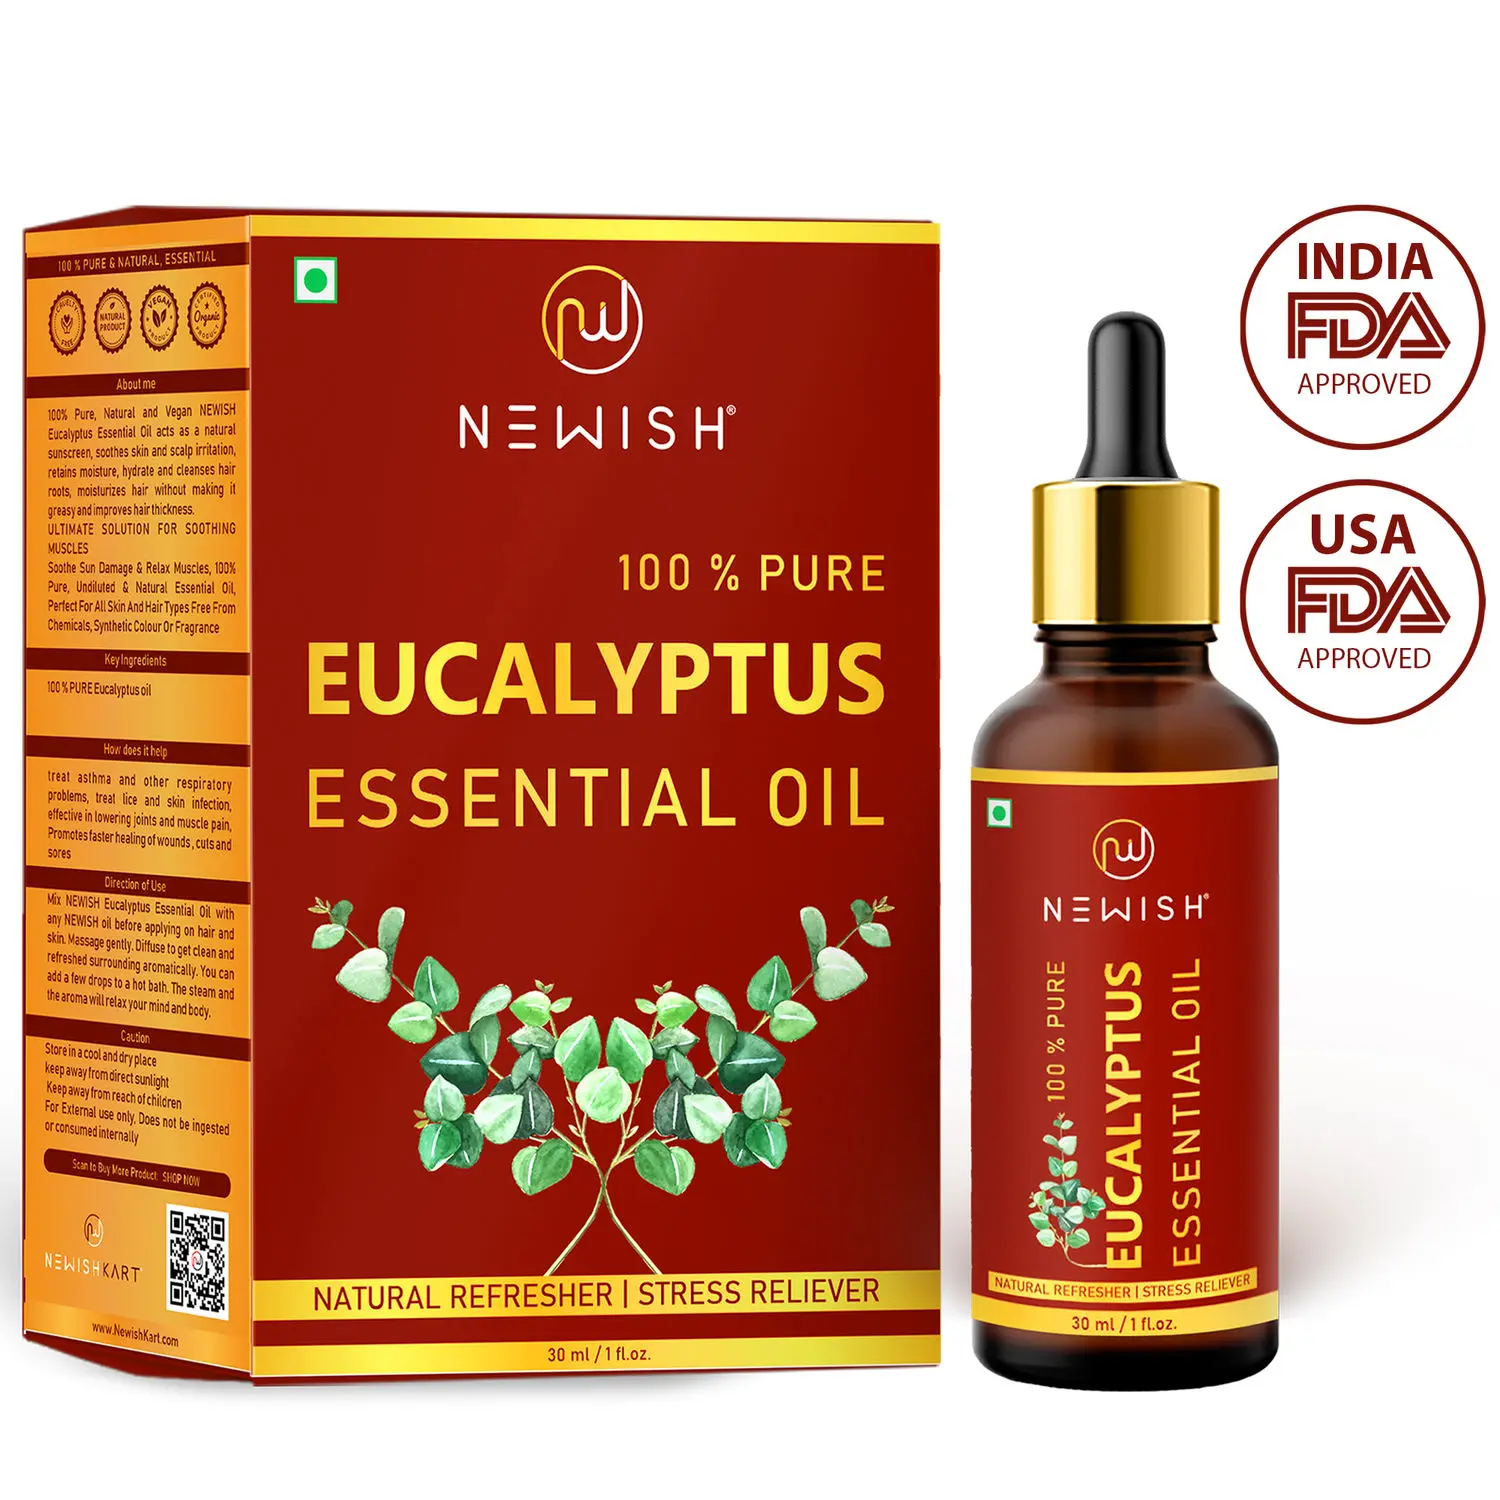 Newish Eucalyptus 100% Natural Essential Oil Pure & Undiluted Therapeutic Grade, for Hair, Beard, Skin, Face and Diffuser 30ml